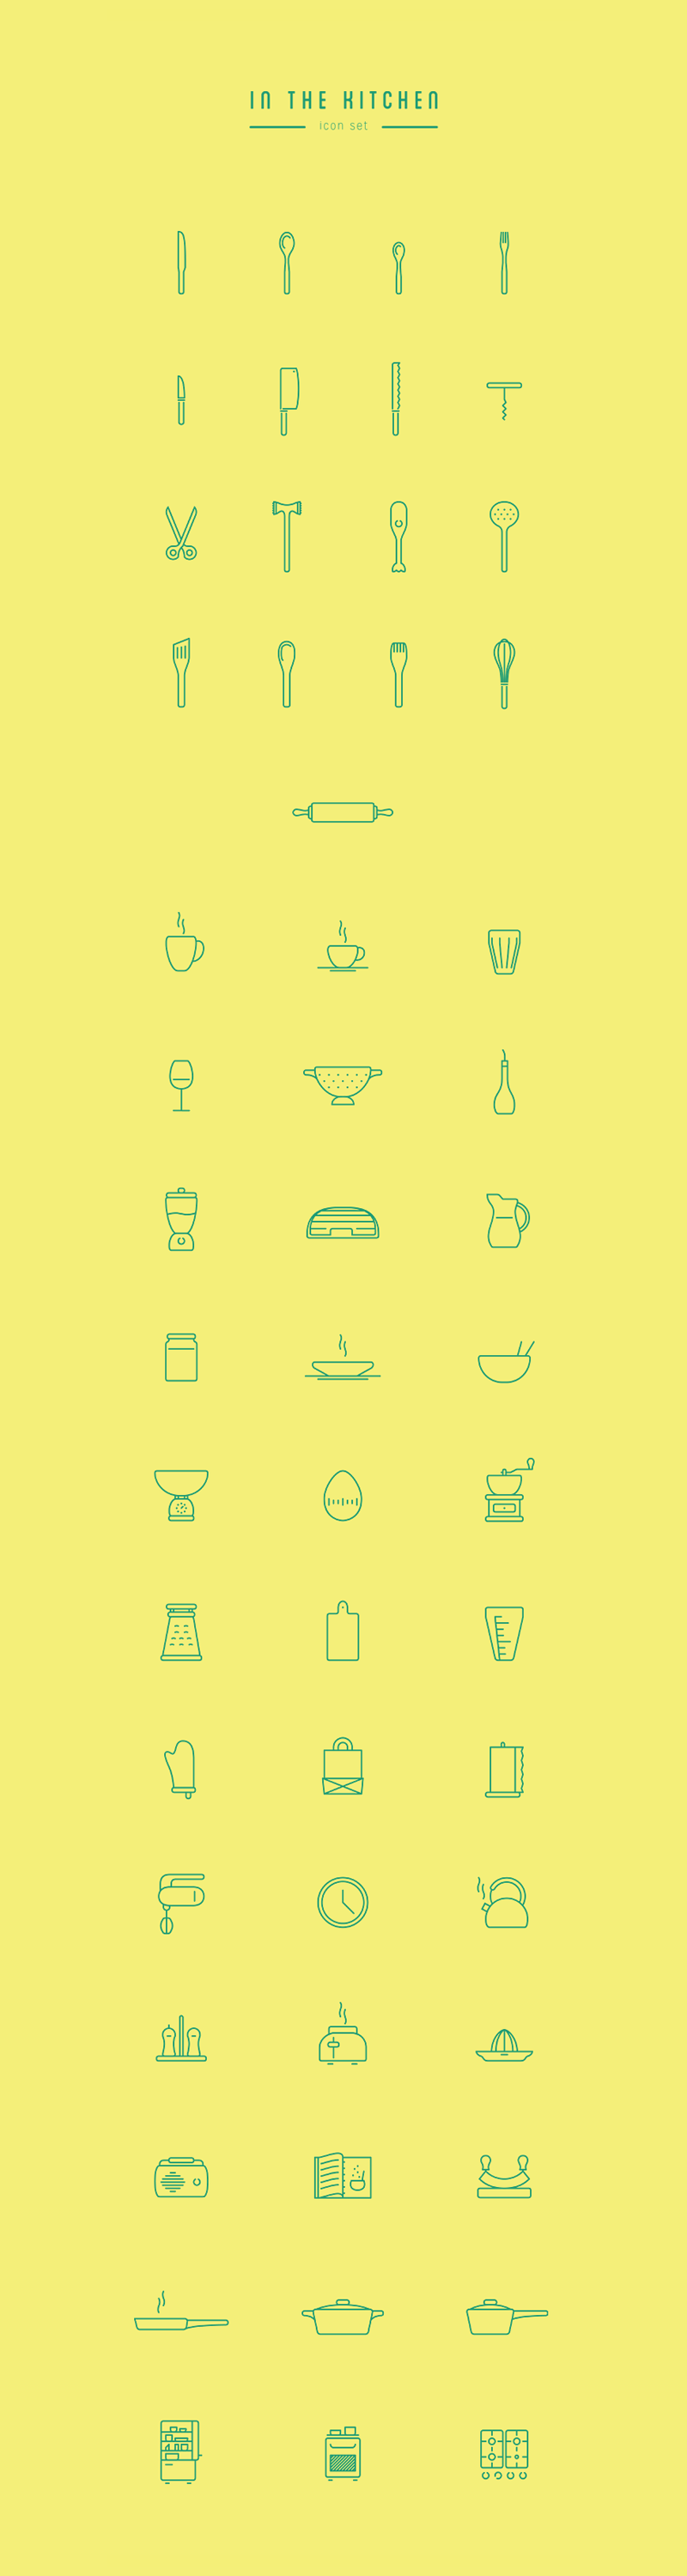 kitchen icons pictogram cook cooker oven fridge pot toaster clock blender glass cup Coffee spoon